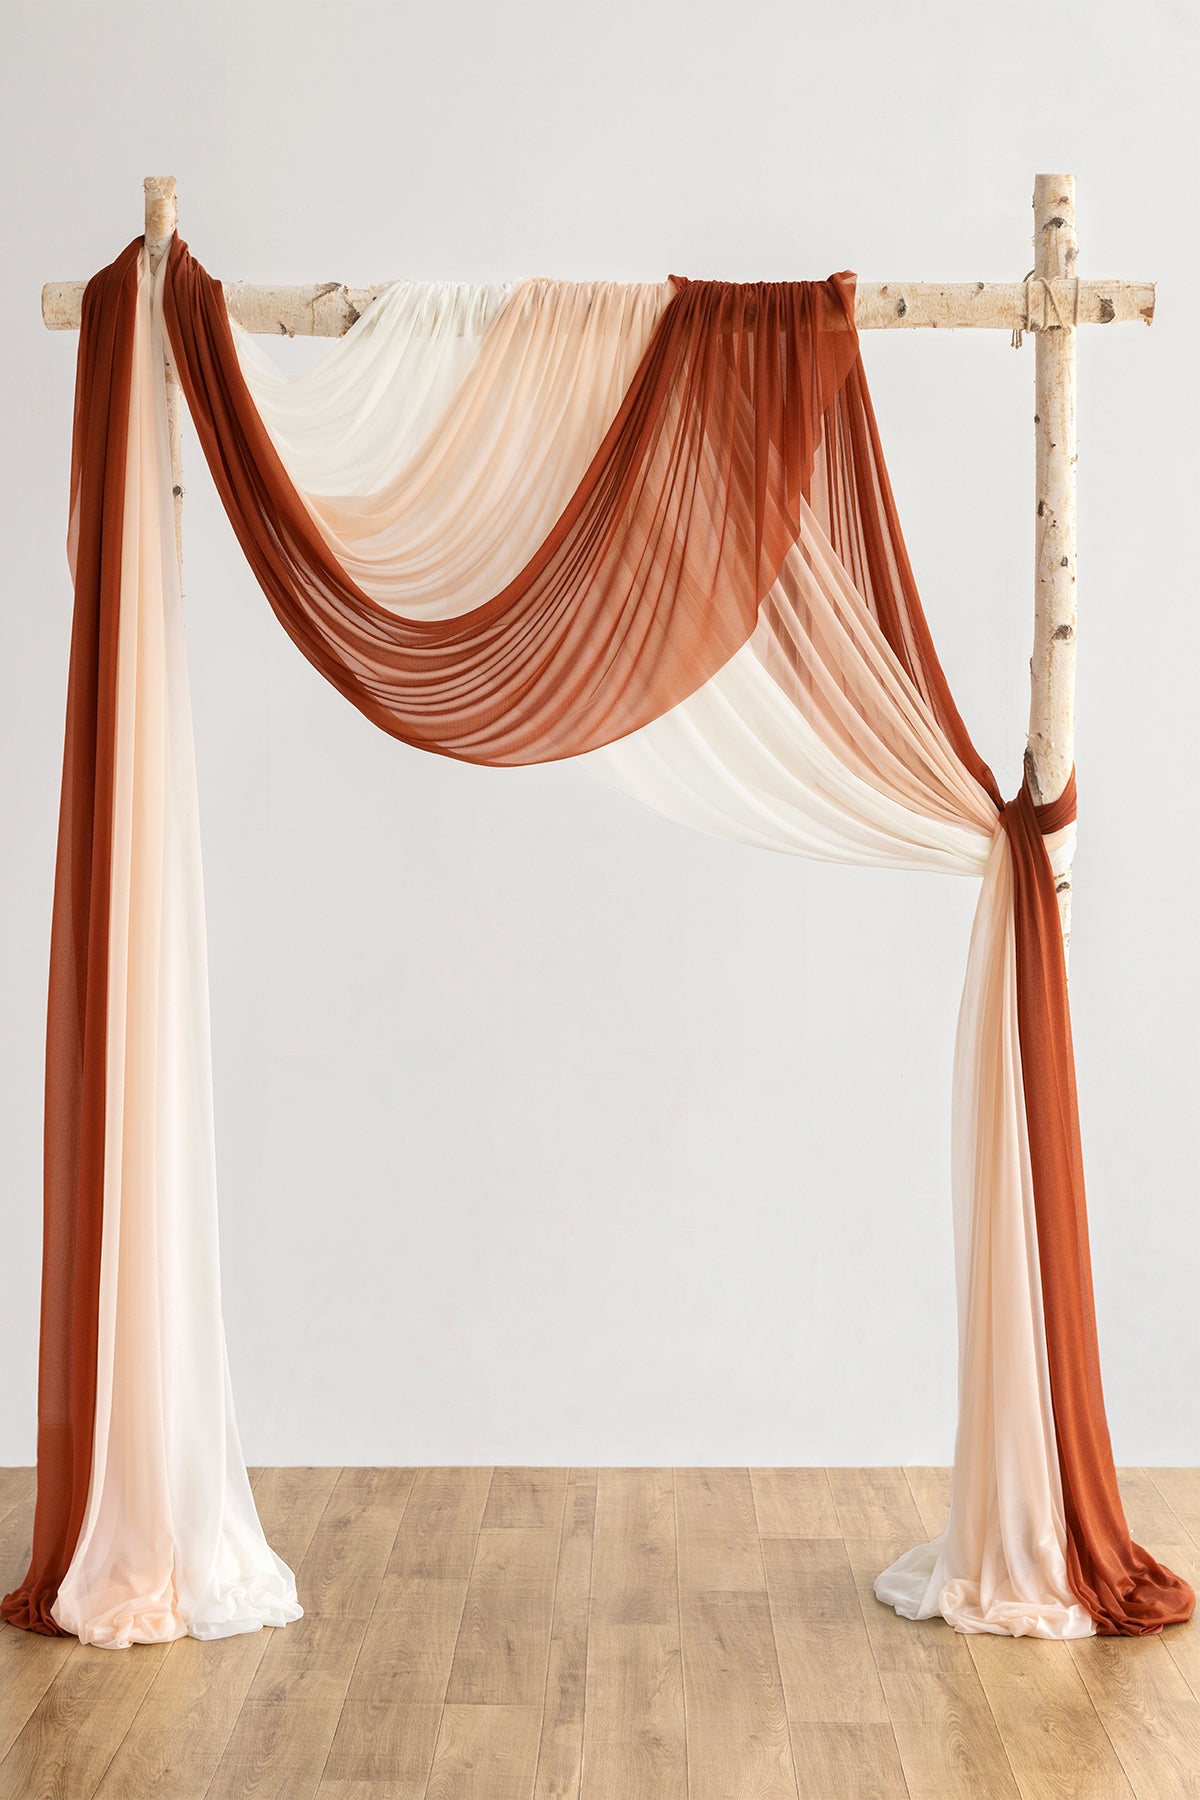 Wedding Arch Draping Fabric Clearance – Ling's Moment